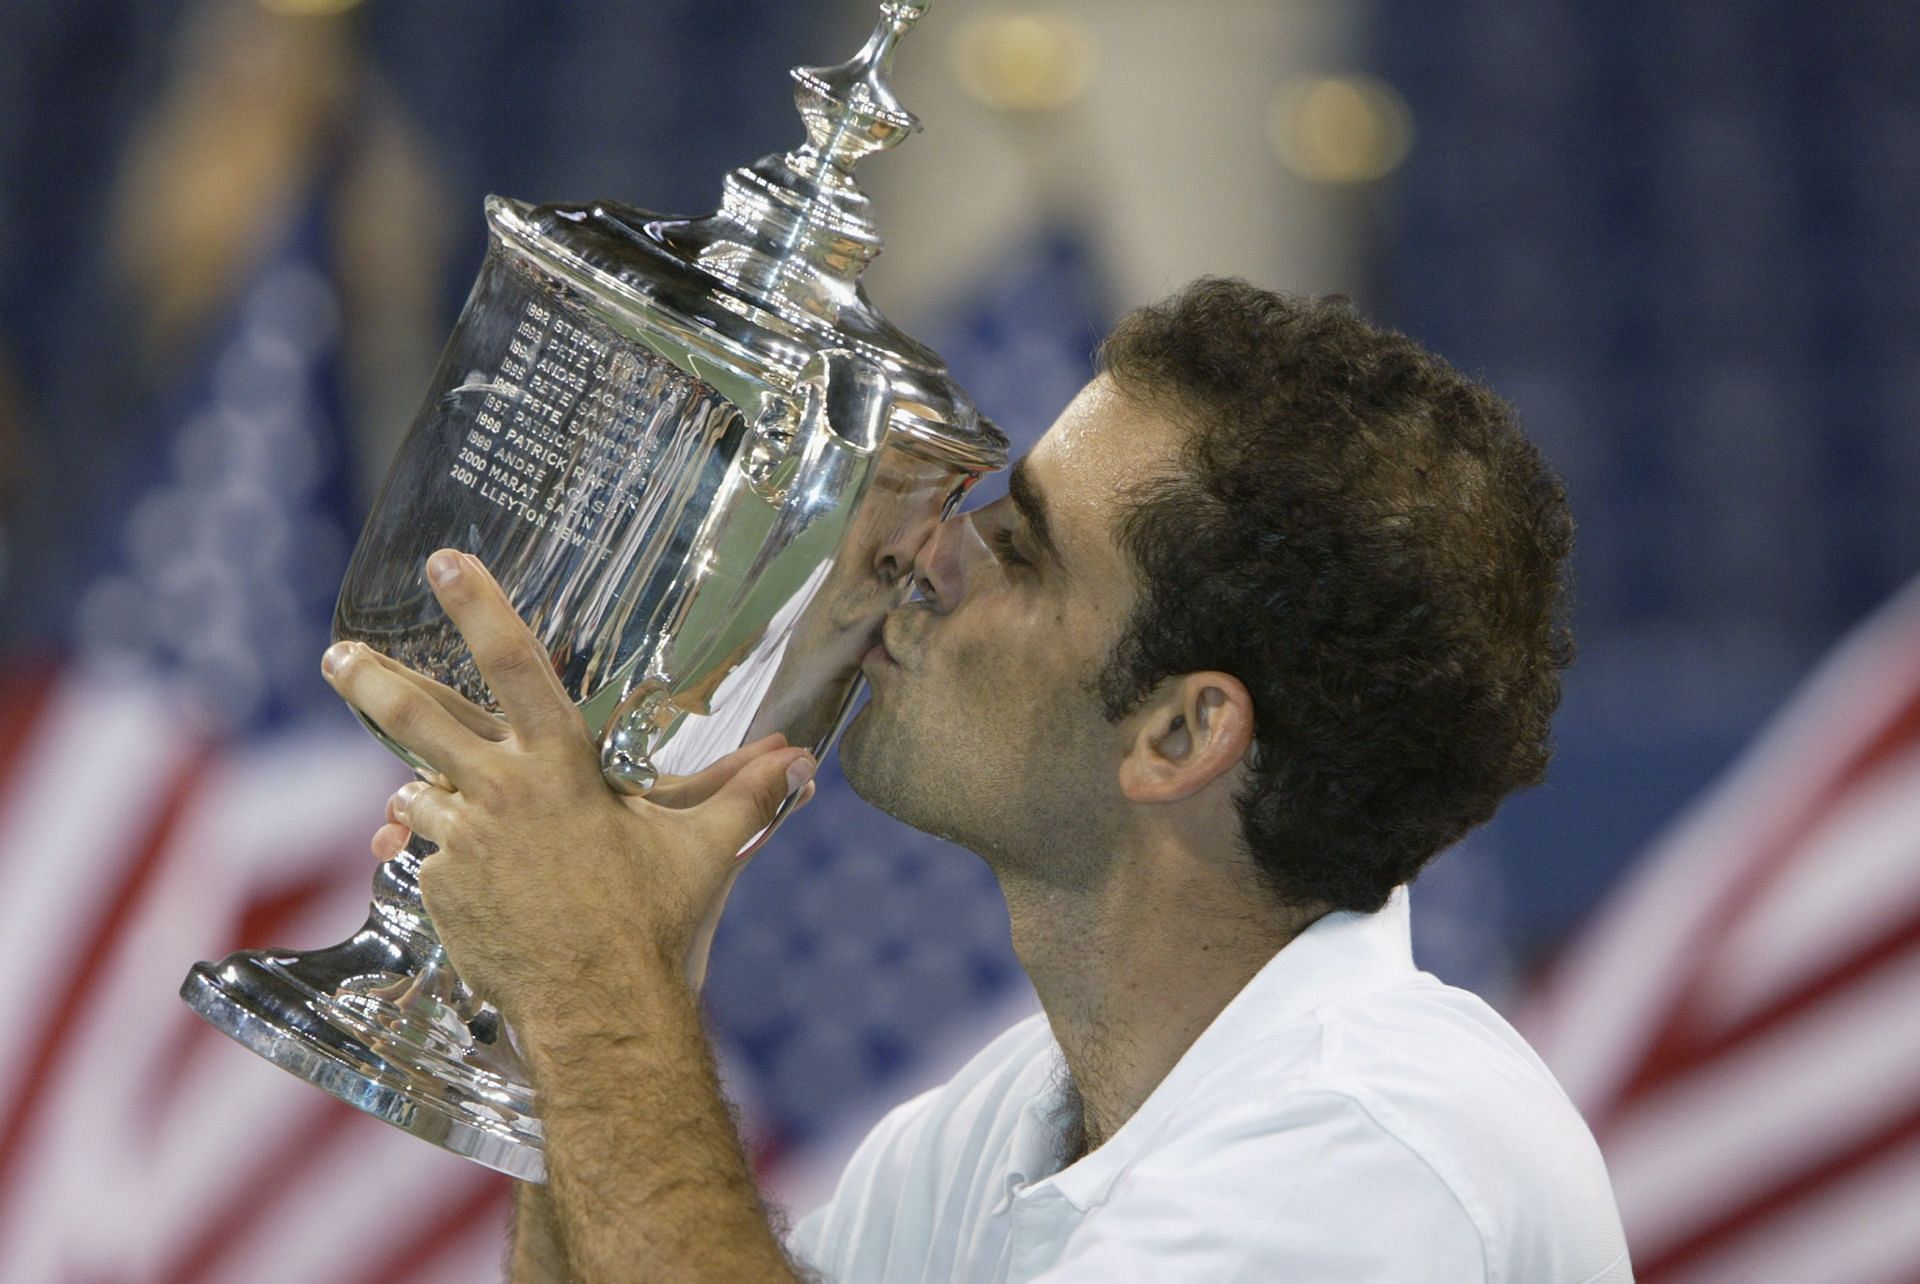 Pete Sampras pictured with his last Grand Slam title at US Open 2002